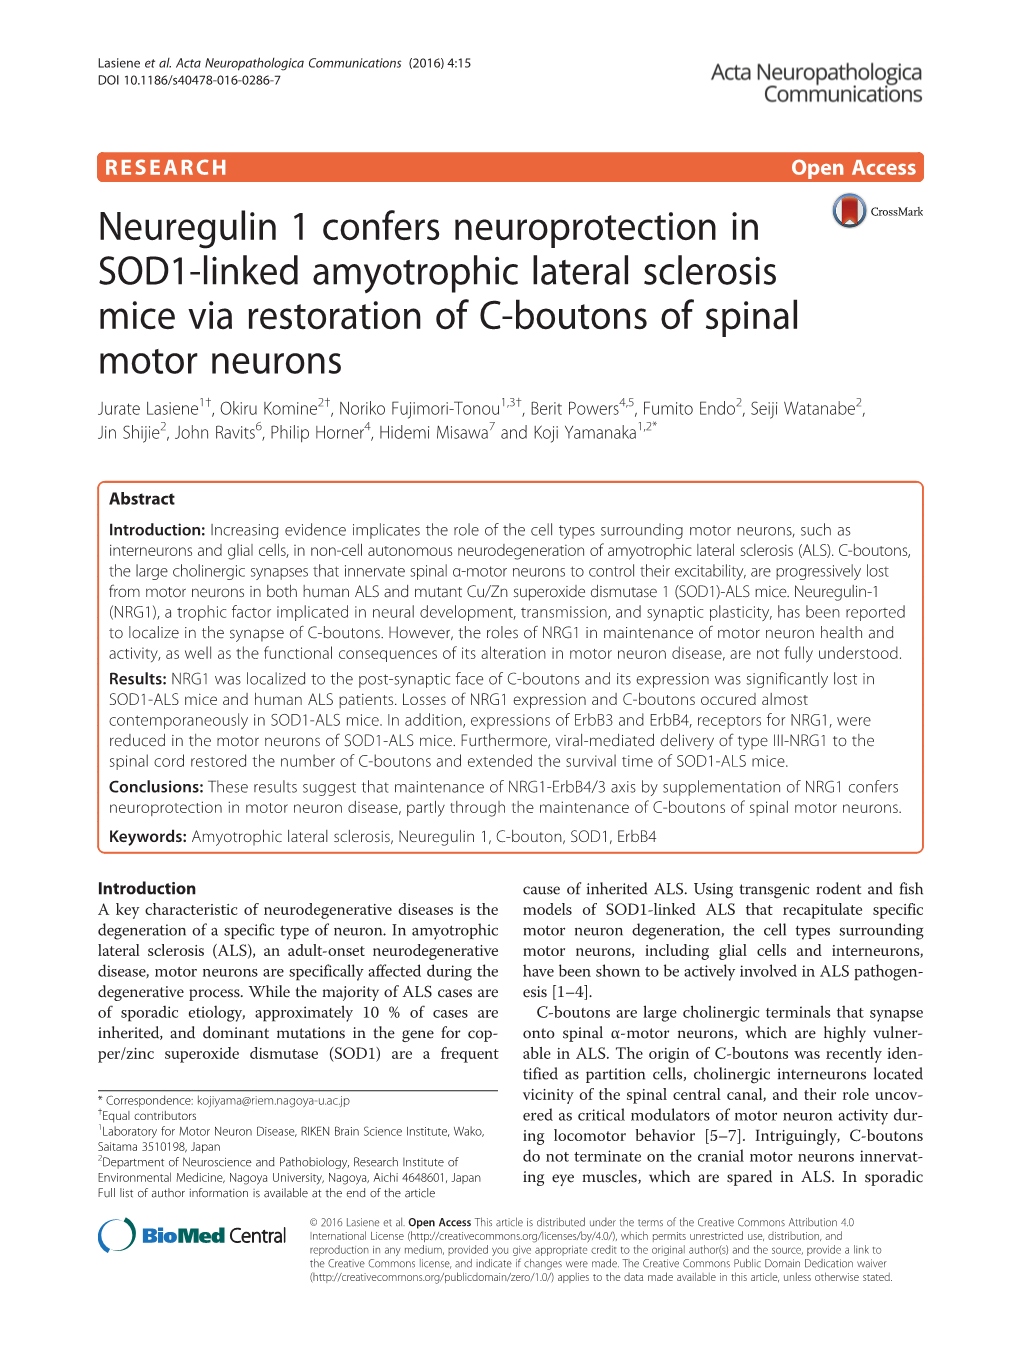 Neuregulin 1 Confers Neuroprotection in SOD1-Linked Amyotrophic Lateral